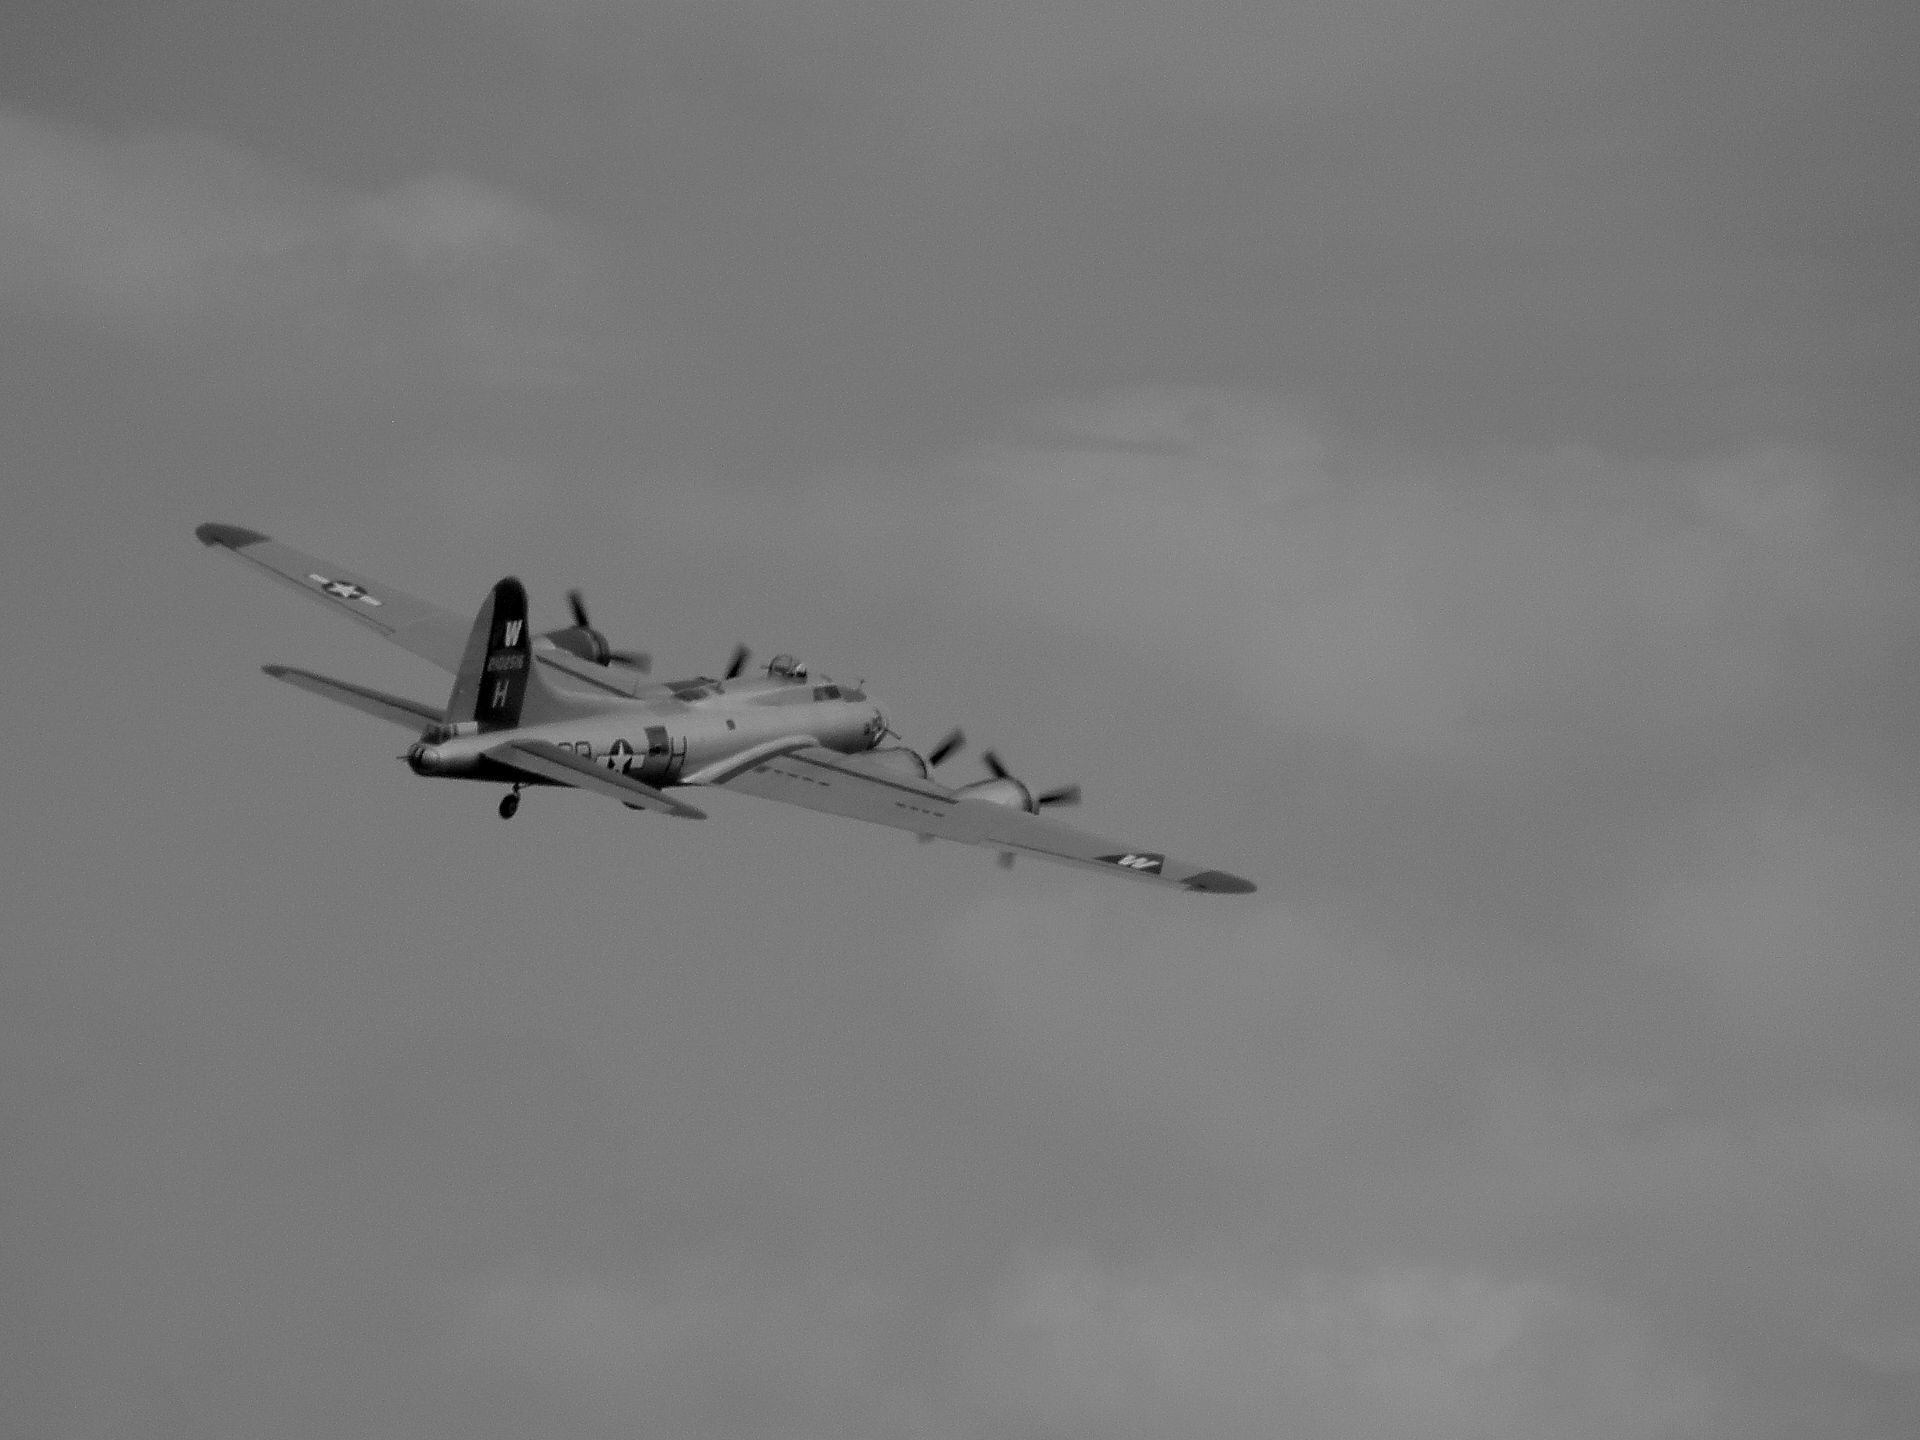 Boeing B-17 Flying Fortress (N5107N) - Tha Experimental Aircraft Associations "Aluminum Overcast" banks into another age as she climbs out from the active at Blue Grass airport (KLEX)... she is visiting the Aviation Museum of Kentucky.